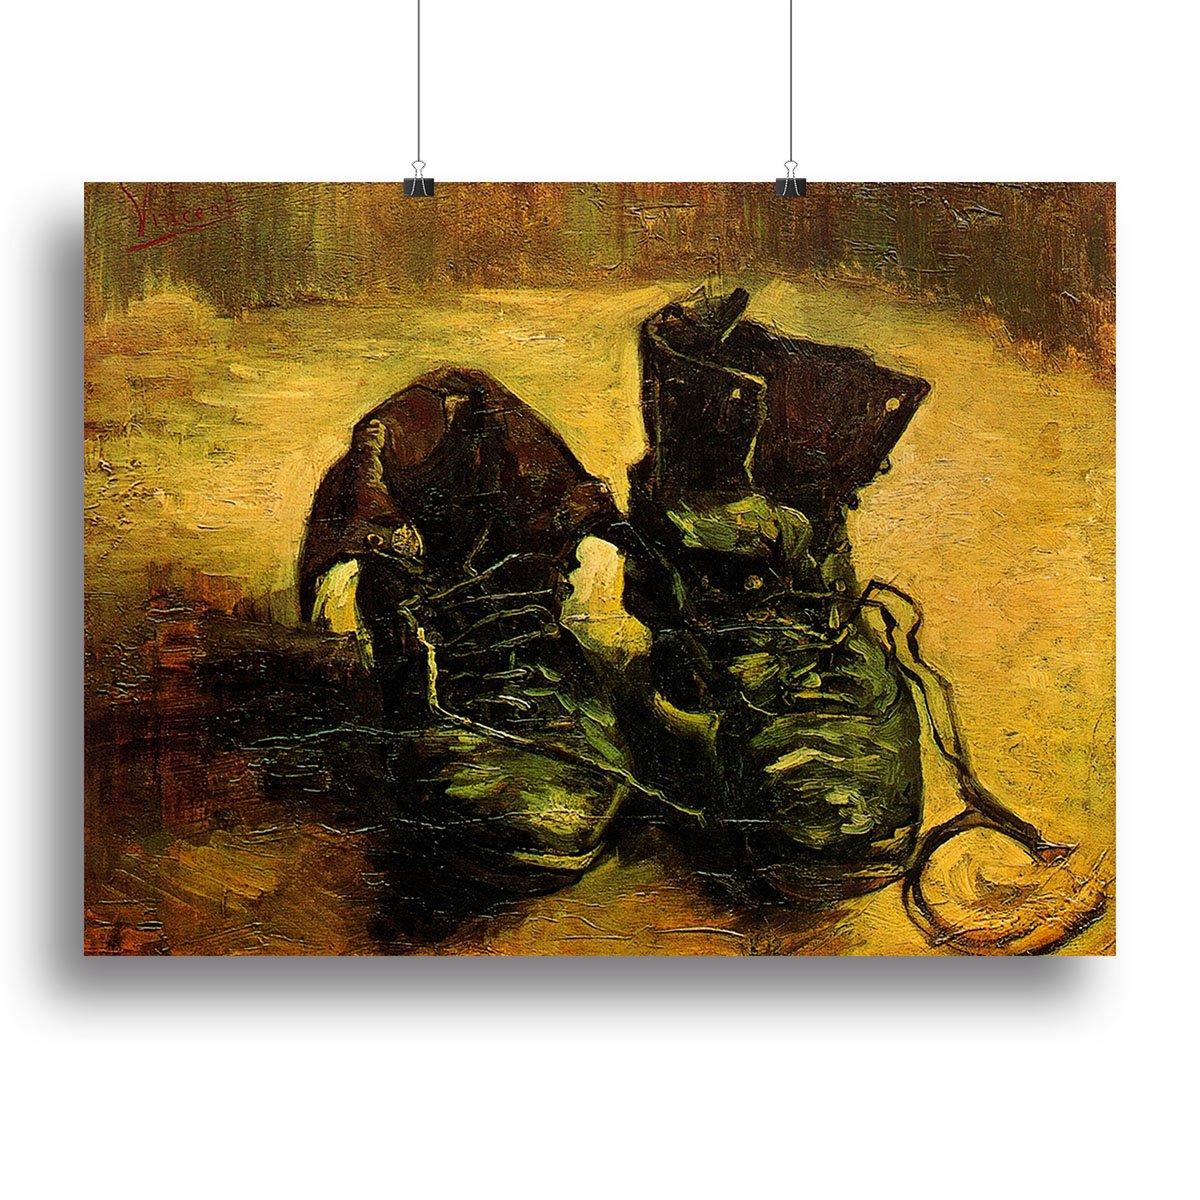 A Pair of Shoes 2 by Van Gogh Canvas Print or Poster